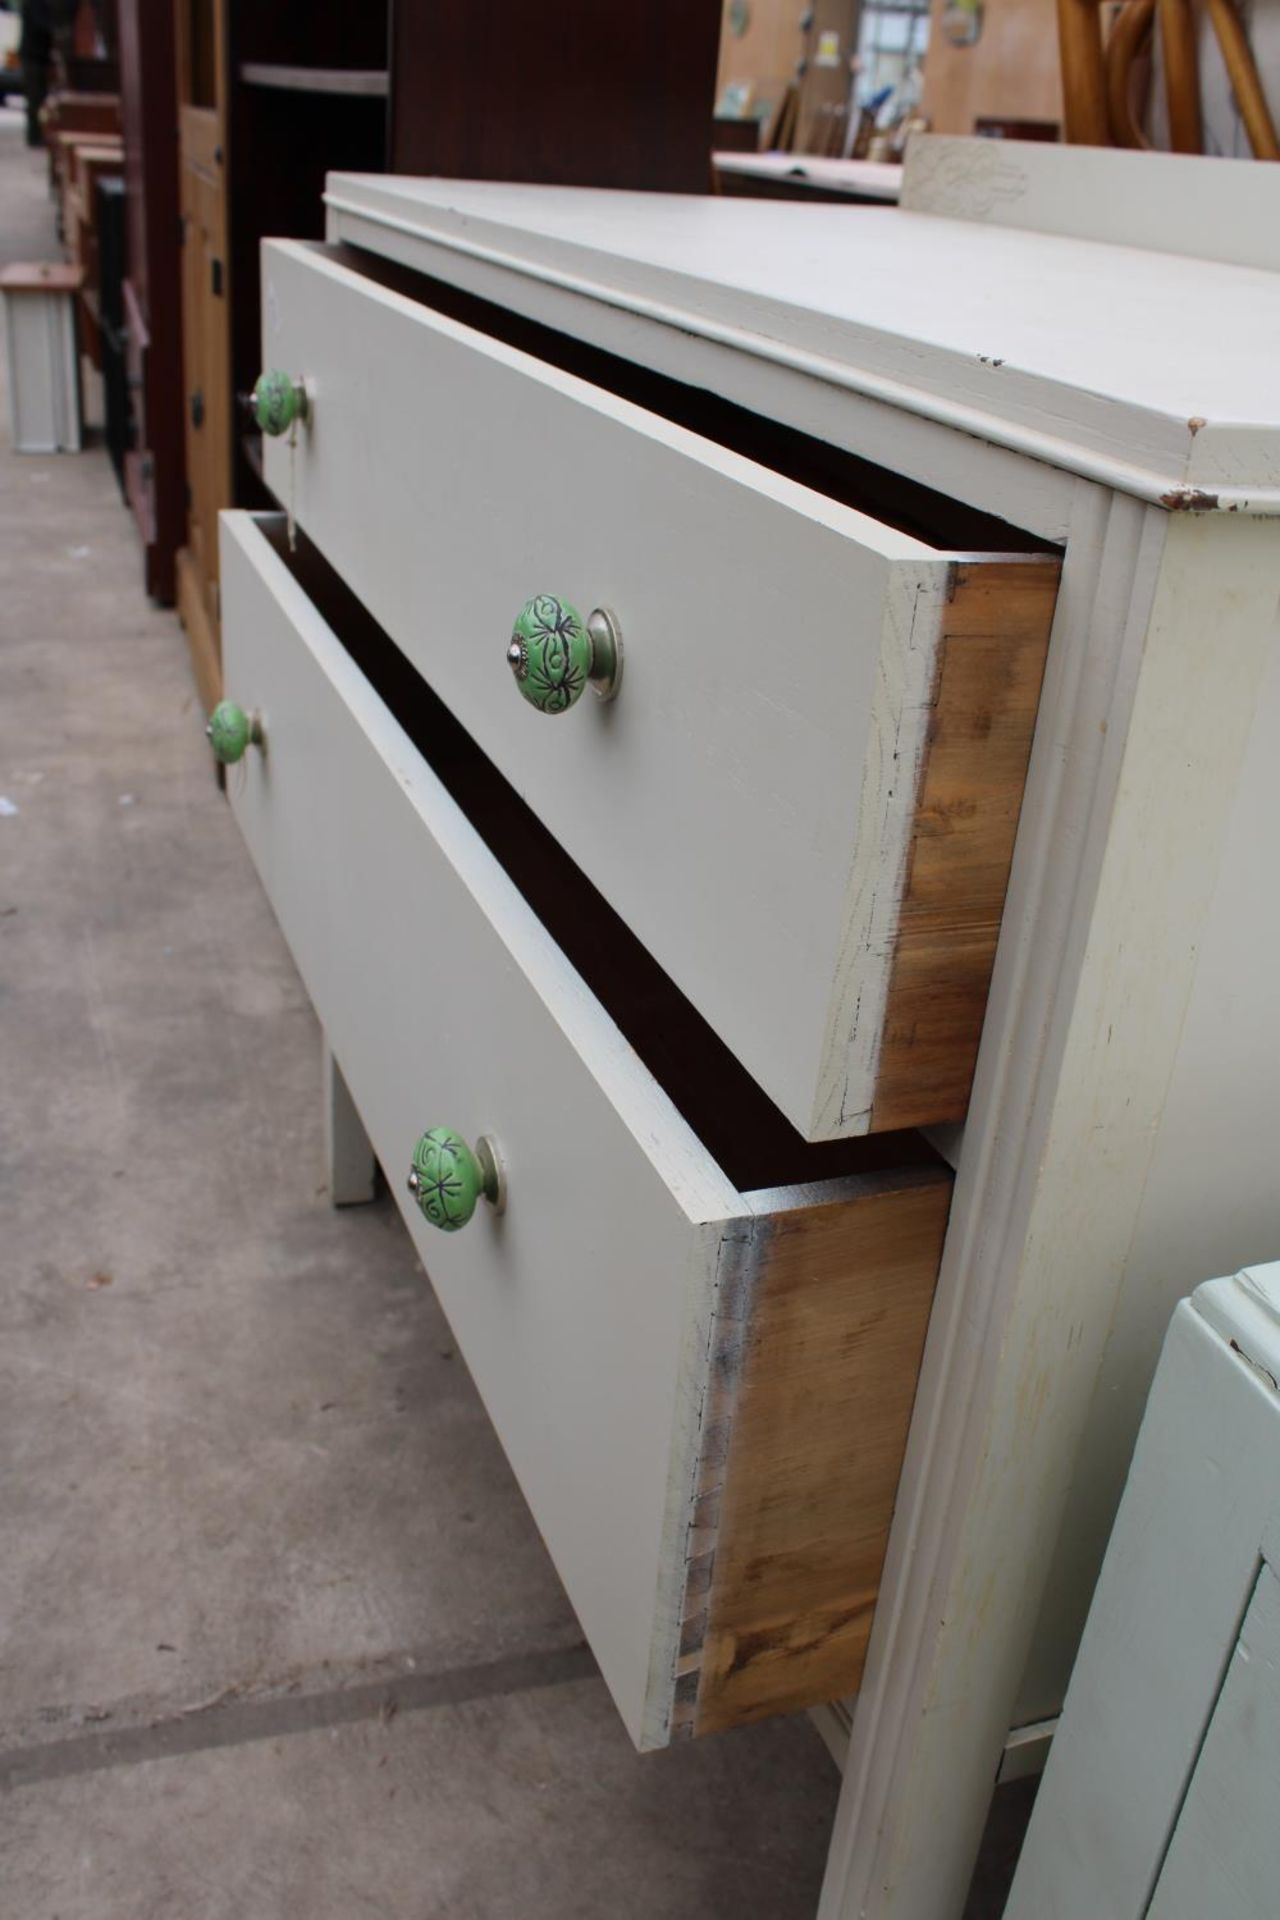 TWO MID 20TH CENTURY PAINTED CHESTS OF DRAWERS WITH MATCHING KNOBS, 36" WID EACH - Image 4 of 4